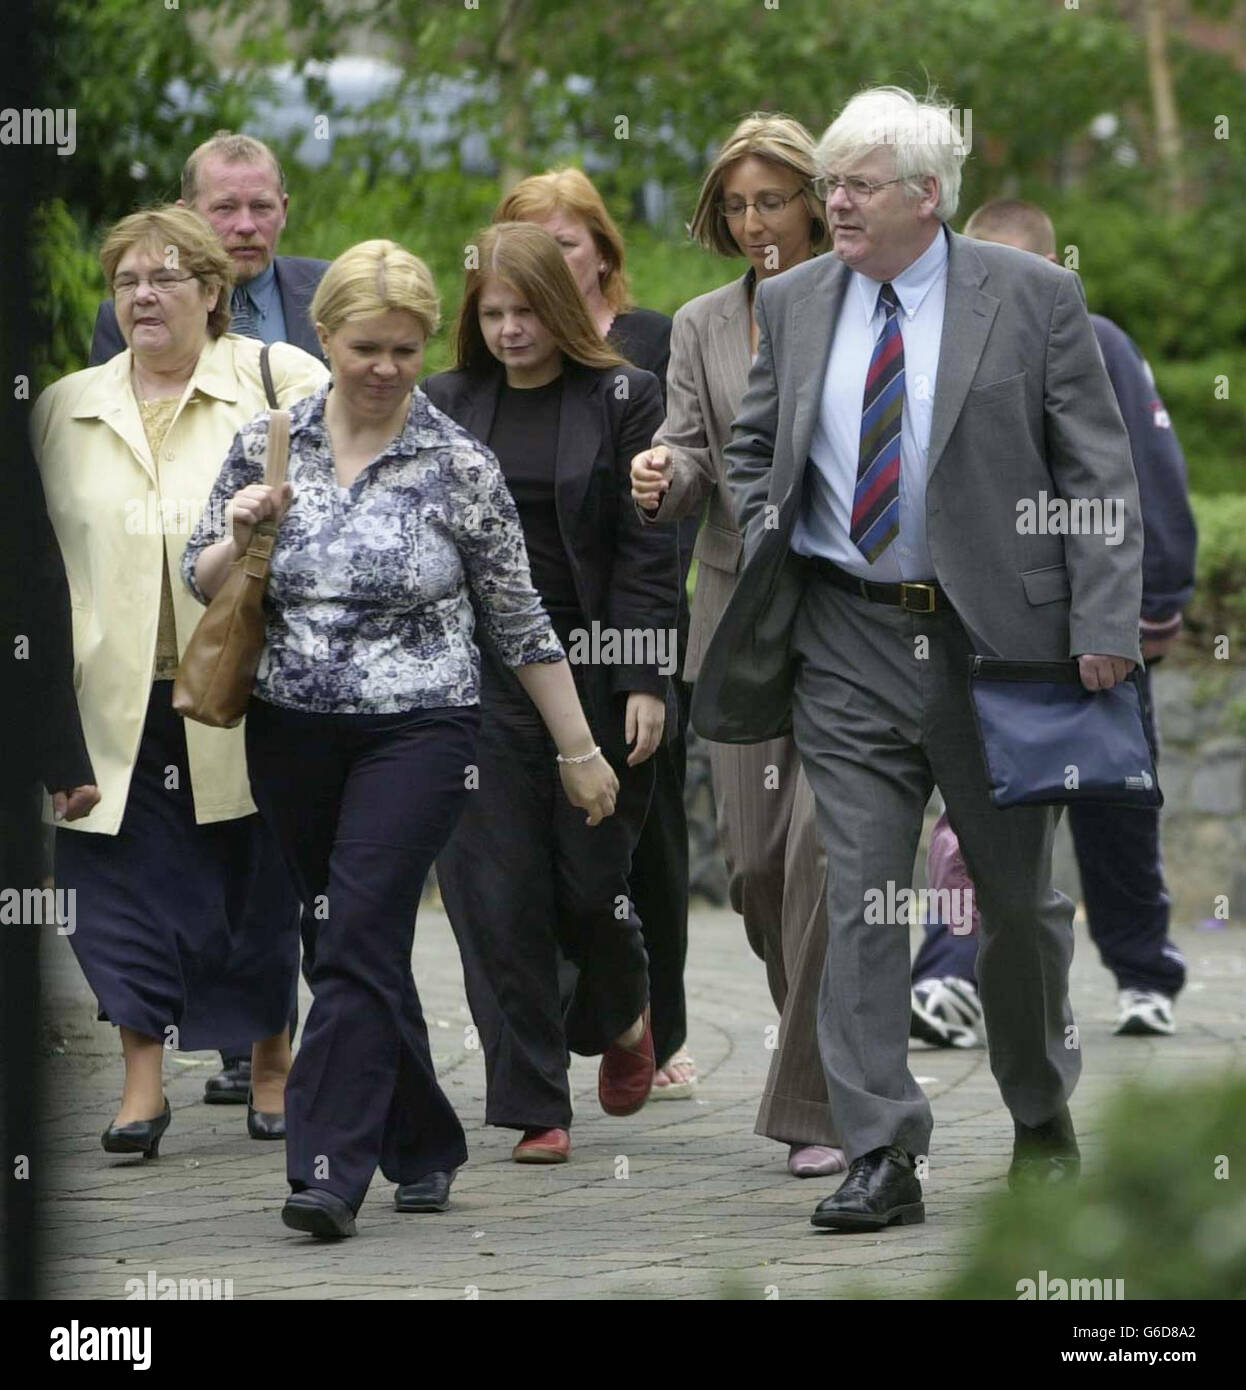 Spokesman for the Omagh Victims Support Group, Michael Gallagher (right) arrives with friends and relatives of those who died in the 1998 Omagh bombing, at the Special Criminal Court in Dublin where Michael McKevitt was standing trial, * accused of masterminding the organisation behind the attack which killed 29 people and two unborn babies. Michael McKevitt, 53, the first man to be charged in the Irish Republic with directing terrorism, is accused of directing the Real IRA between 1999 and 2001 and of being a member of the group. He denies the charges. Stock Photo